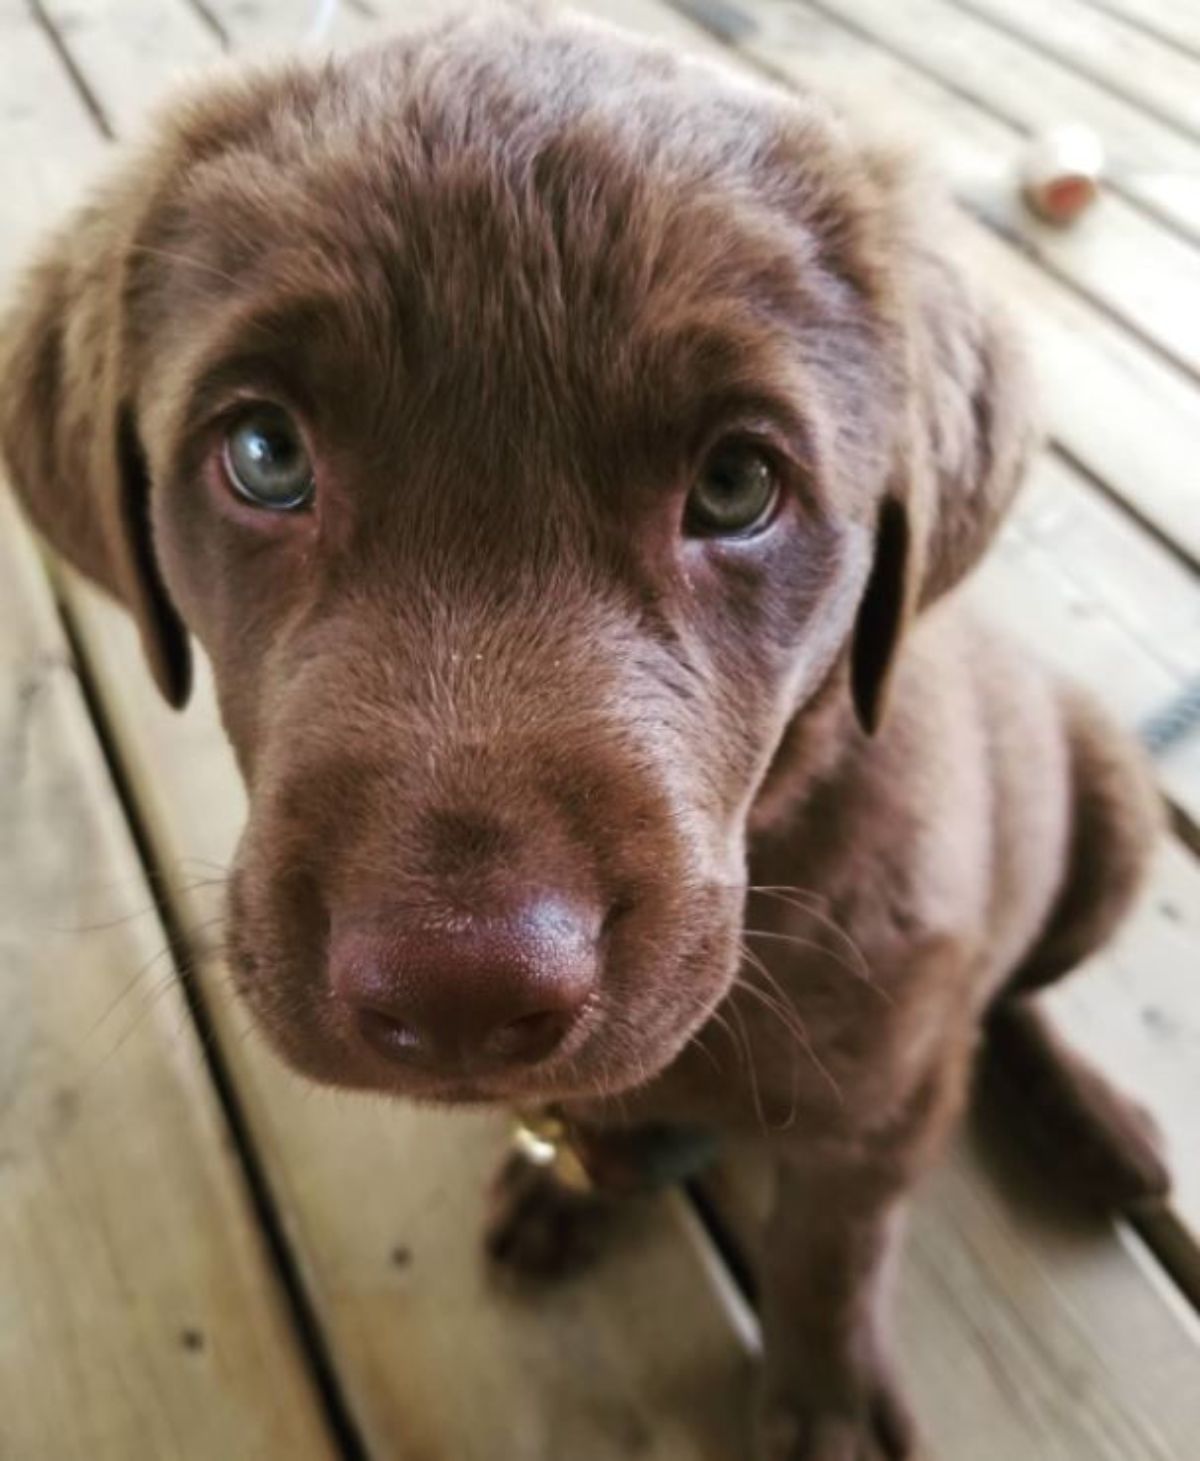 Chesapeake Bay Retriever puppy sitting on the wooden floor with its sad eyes